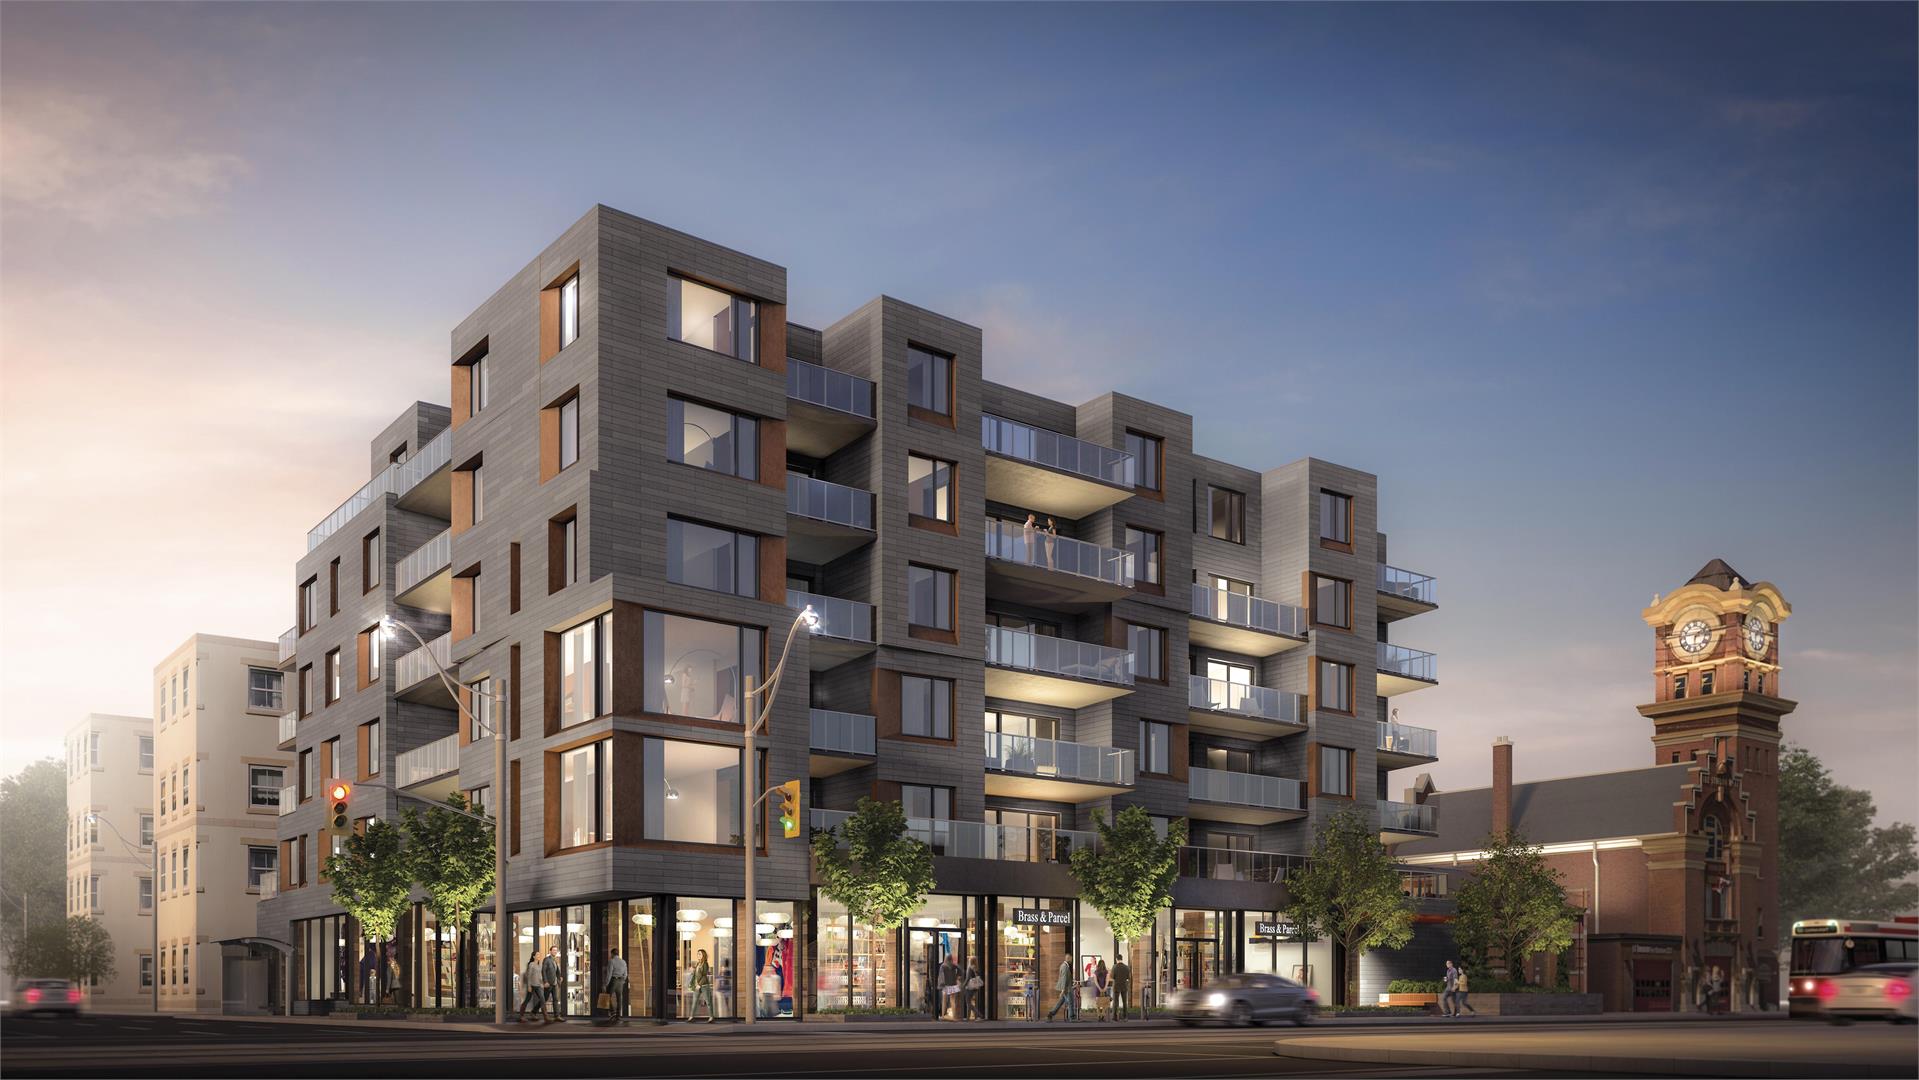 Rendering of Heartwood the Beach Condos exterior and streetscape